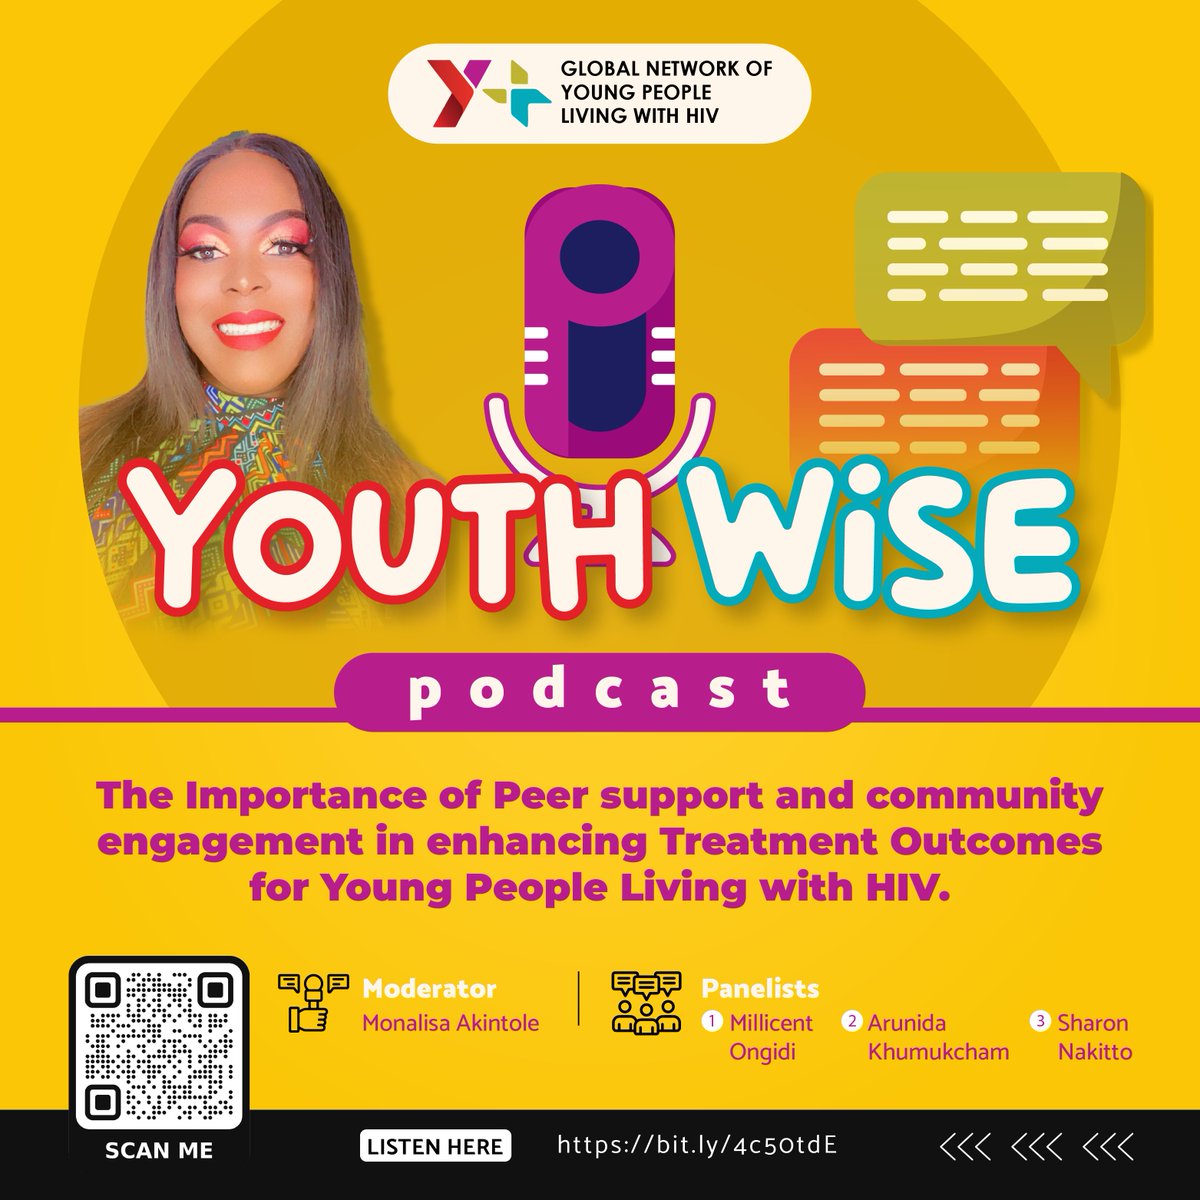 Tune in now 📻 for the #YouthWISE podcast on 'The Importance of Peer Support and Community Engagement in Enhancing Treatment Outcomes for Young People Living with #HIV'. Listen here via Spotify 🎧 podcasters.spotify.com/pod/show/yplus…